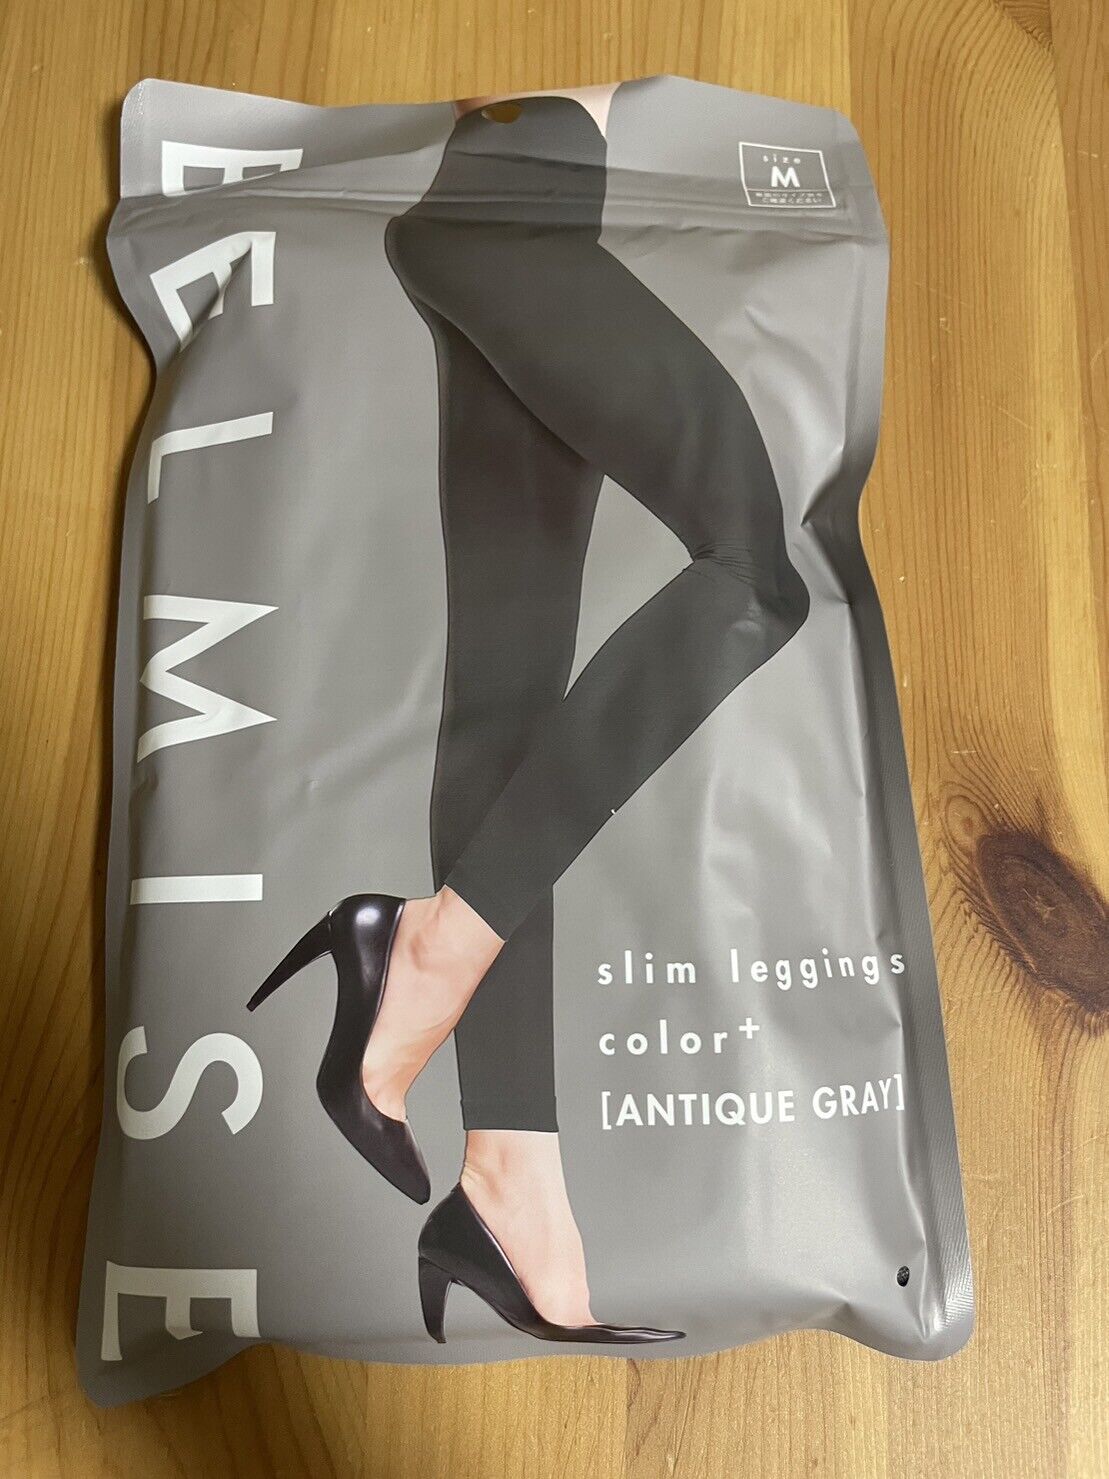 BELMISE Slim Leggings color plus colors sizes available great quality from  Japan